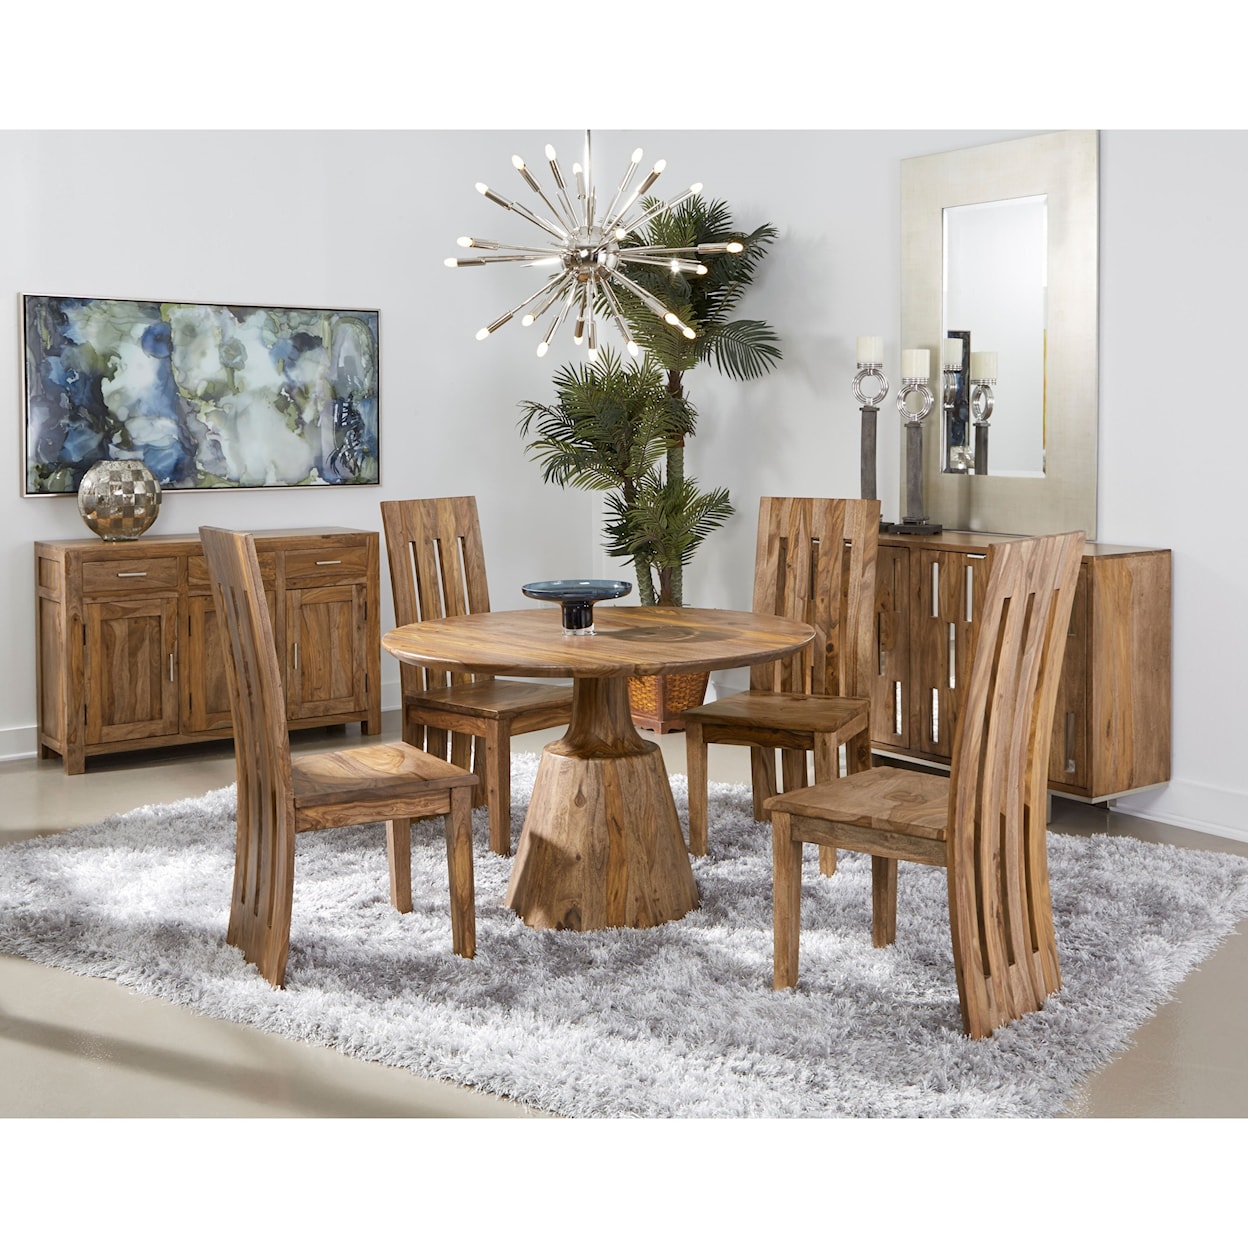 Coast2Coast Home Brownstone 5-Piece Table and Chair Set